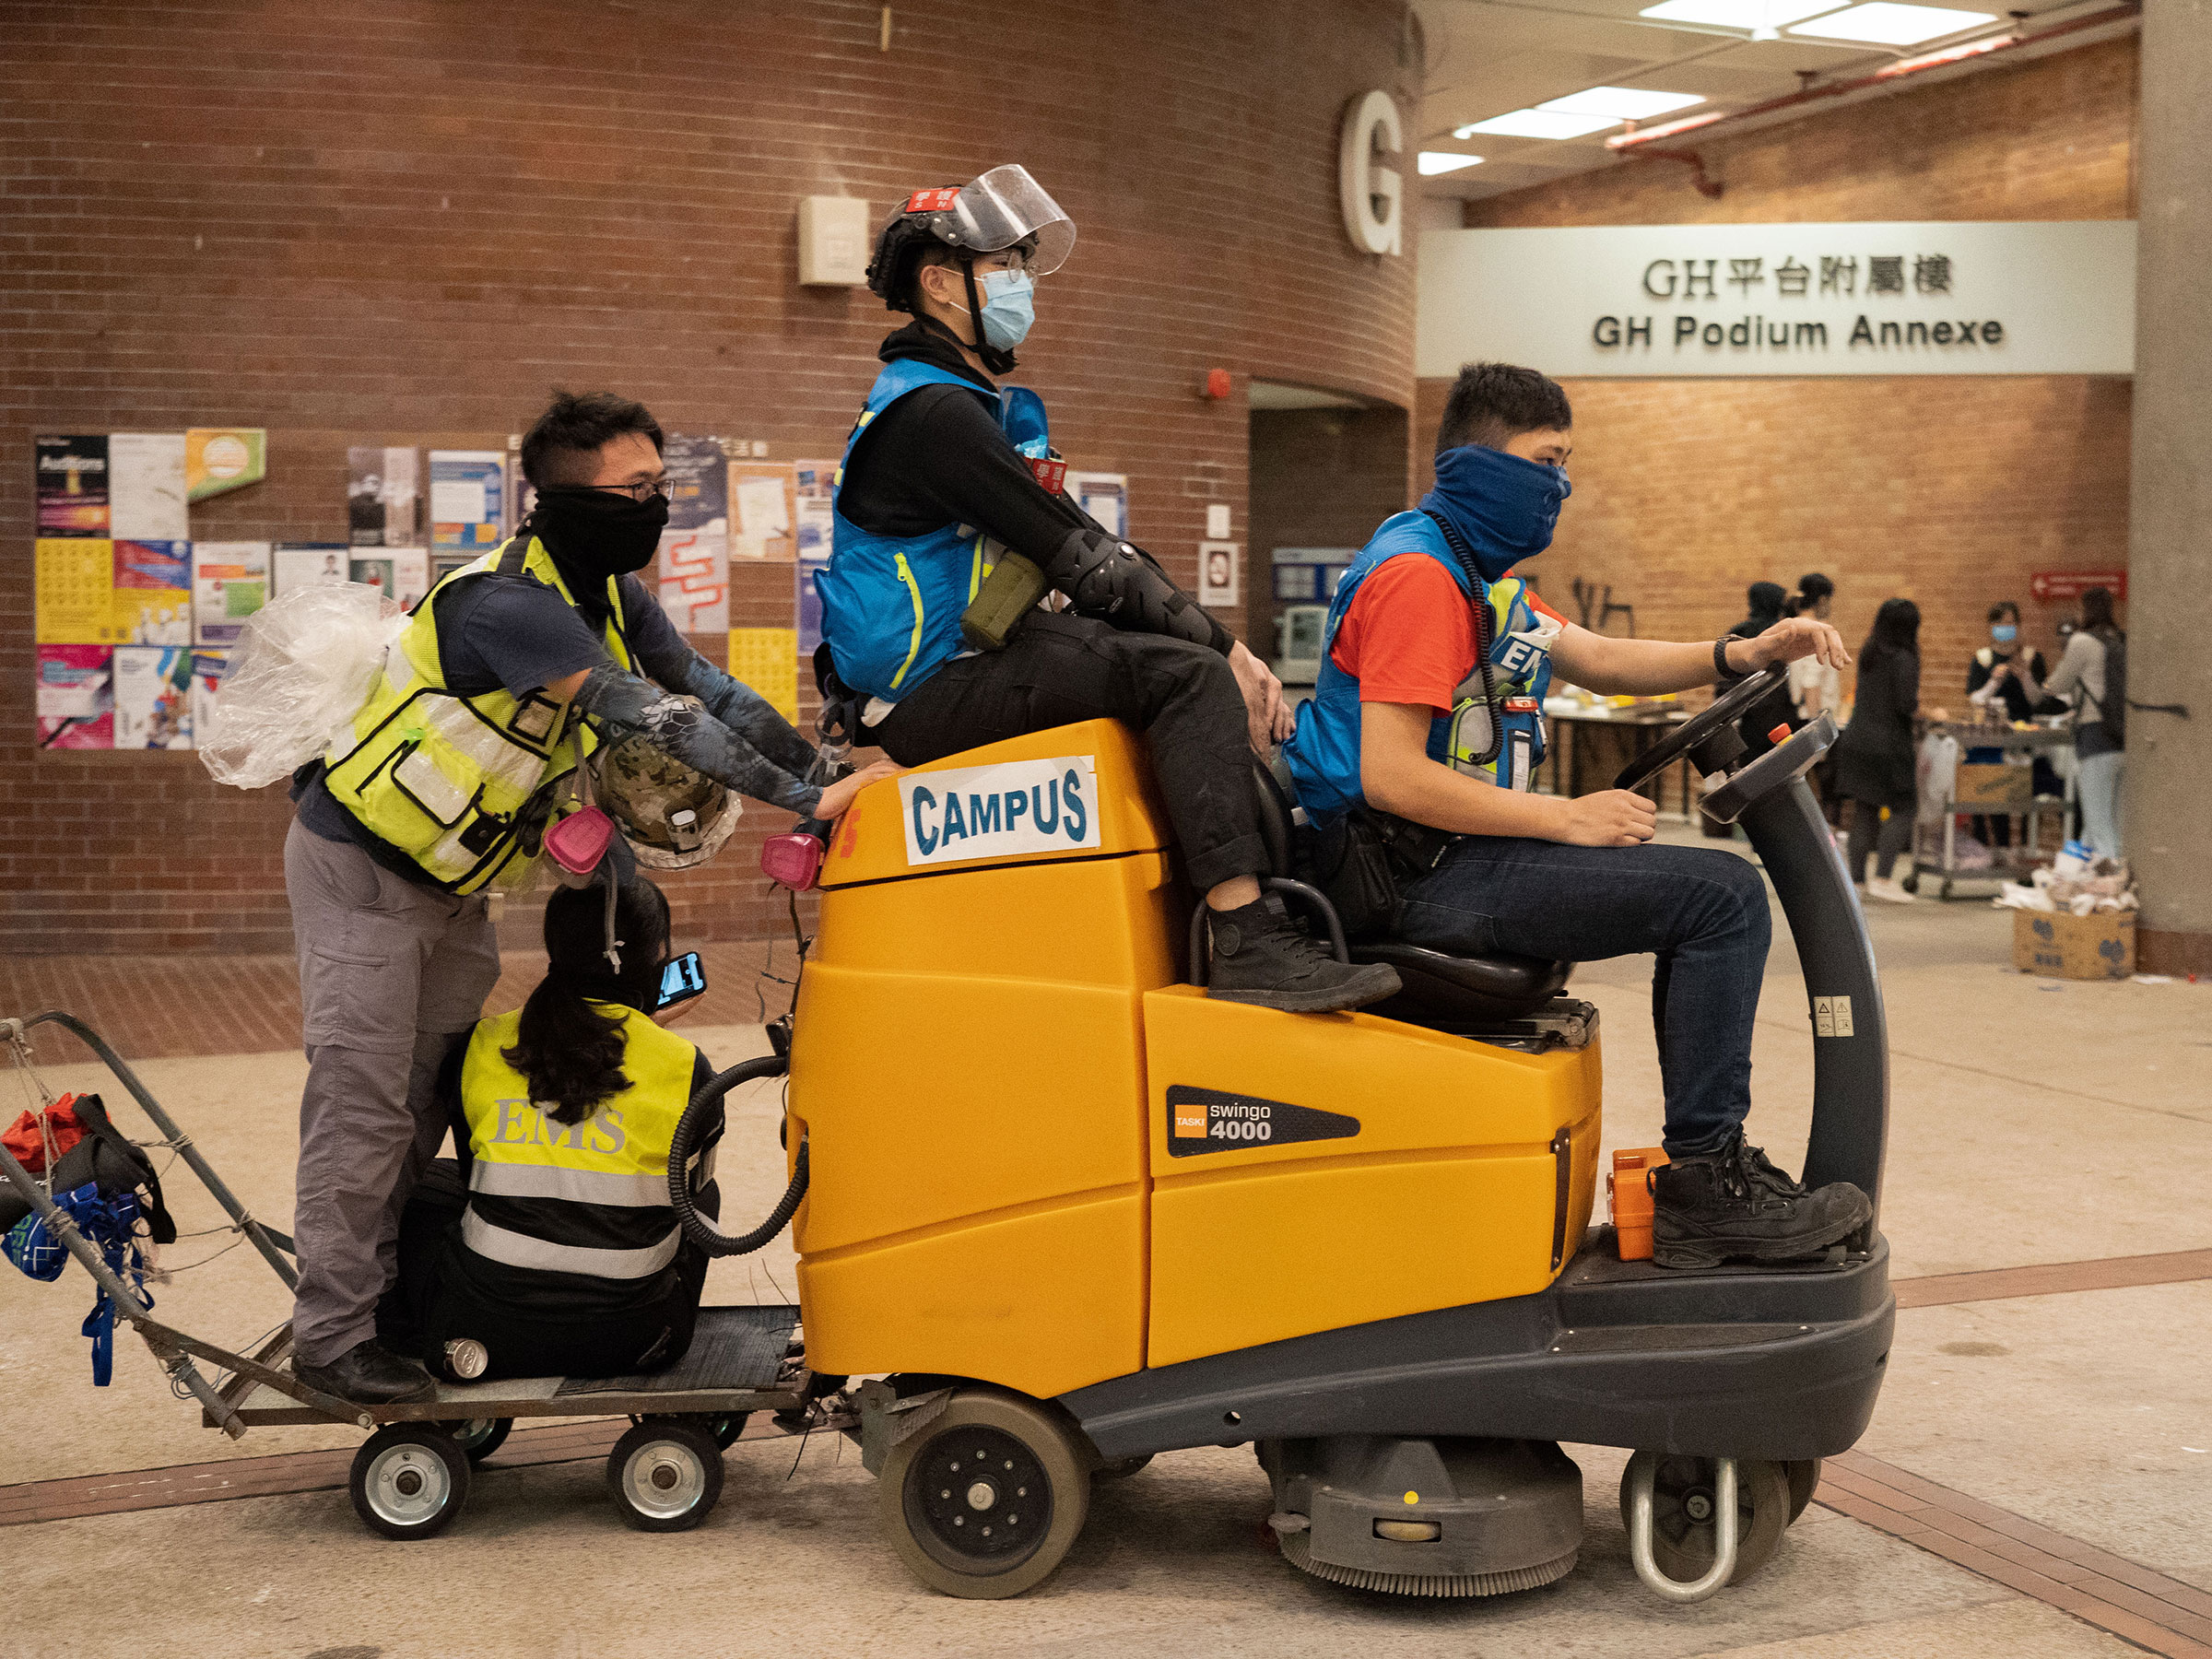 First-aiders convert a floor cleaning machine into a makeshift ambulance, Nov. 14.